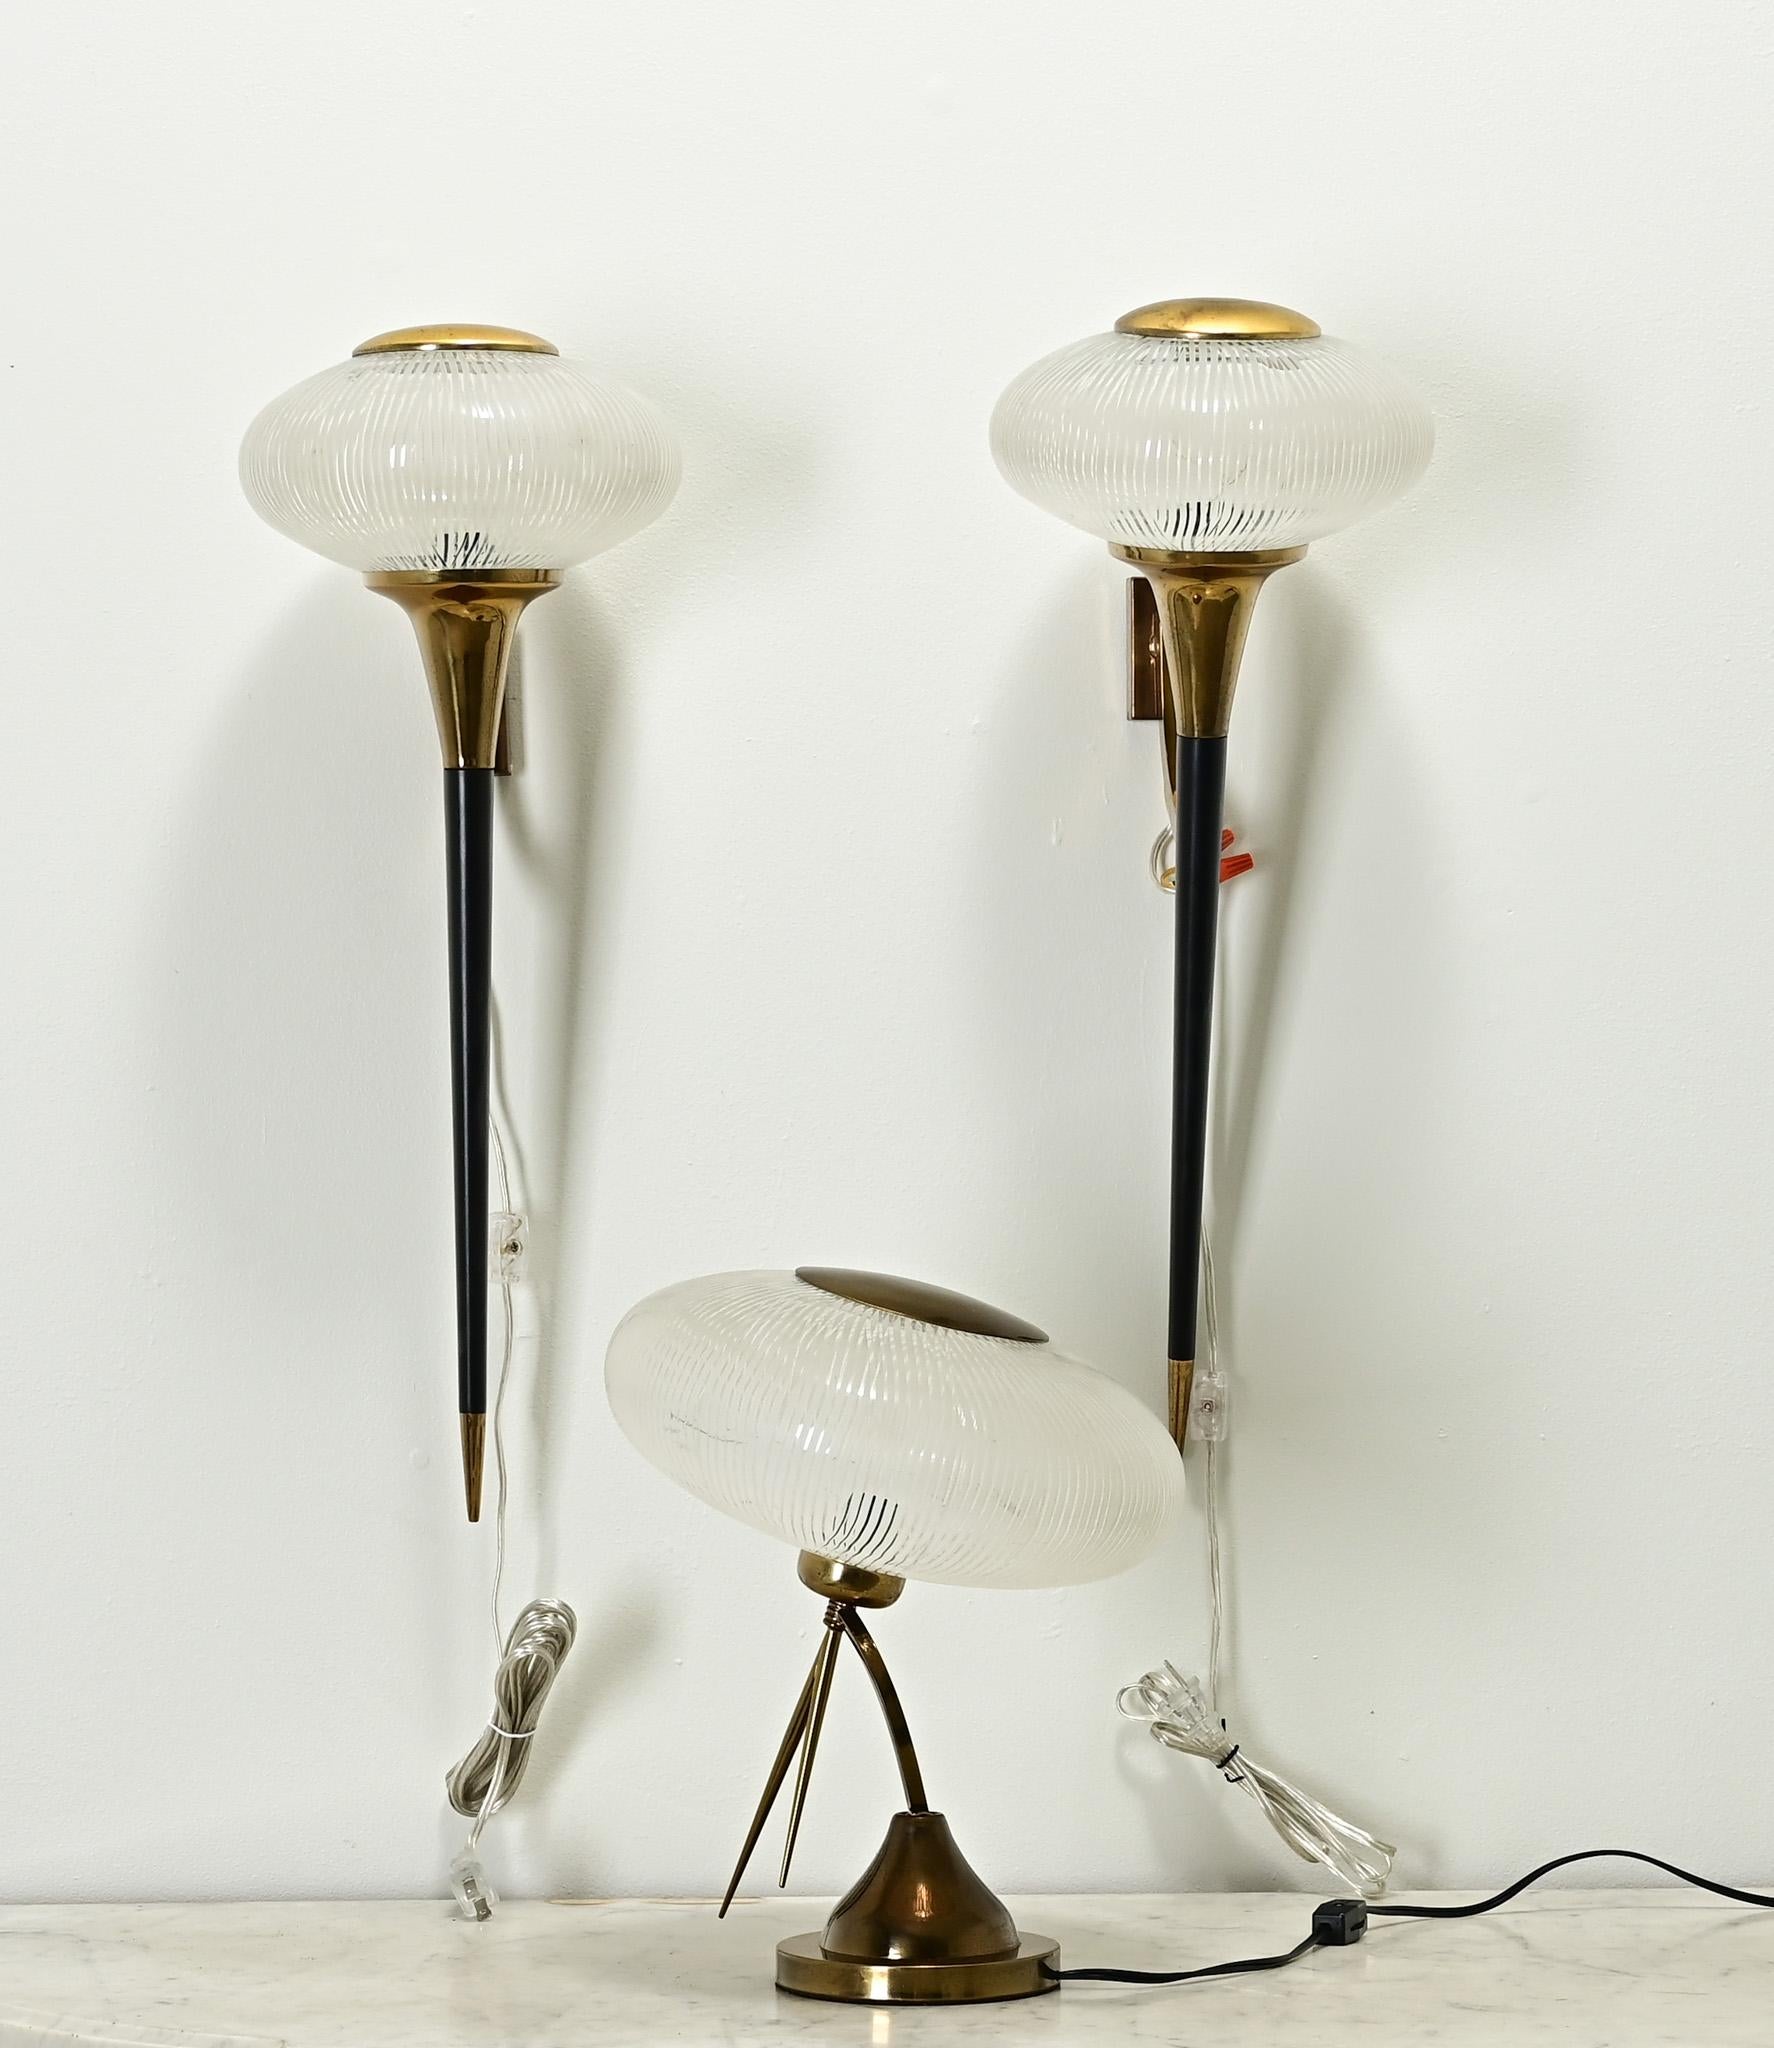 An impressive collection of a pair of sconces and a table lamp made in Mid-Century France. The fixtures each have a round brass plate at the top that is removable for changing a single light bulb. The bulbous etched glass globes are whimsical and